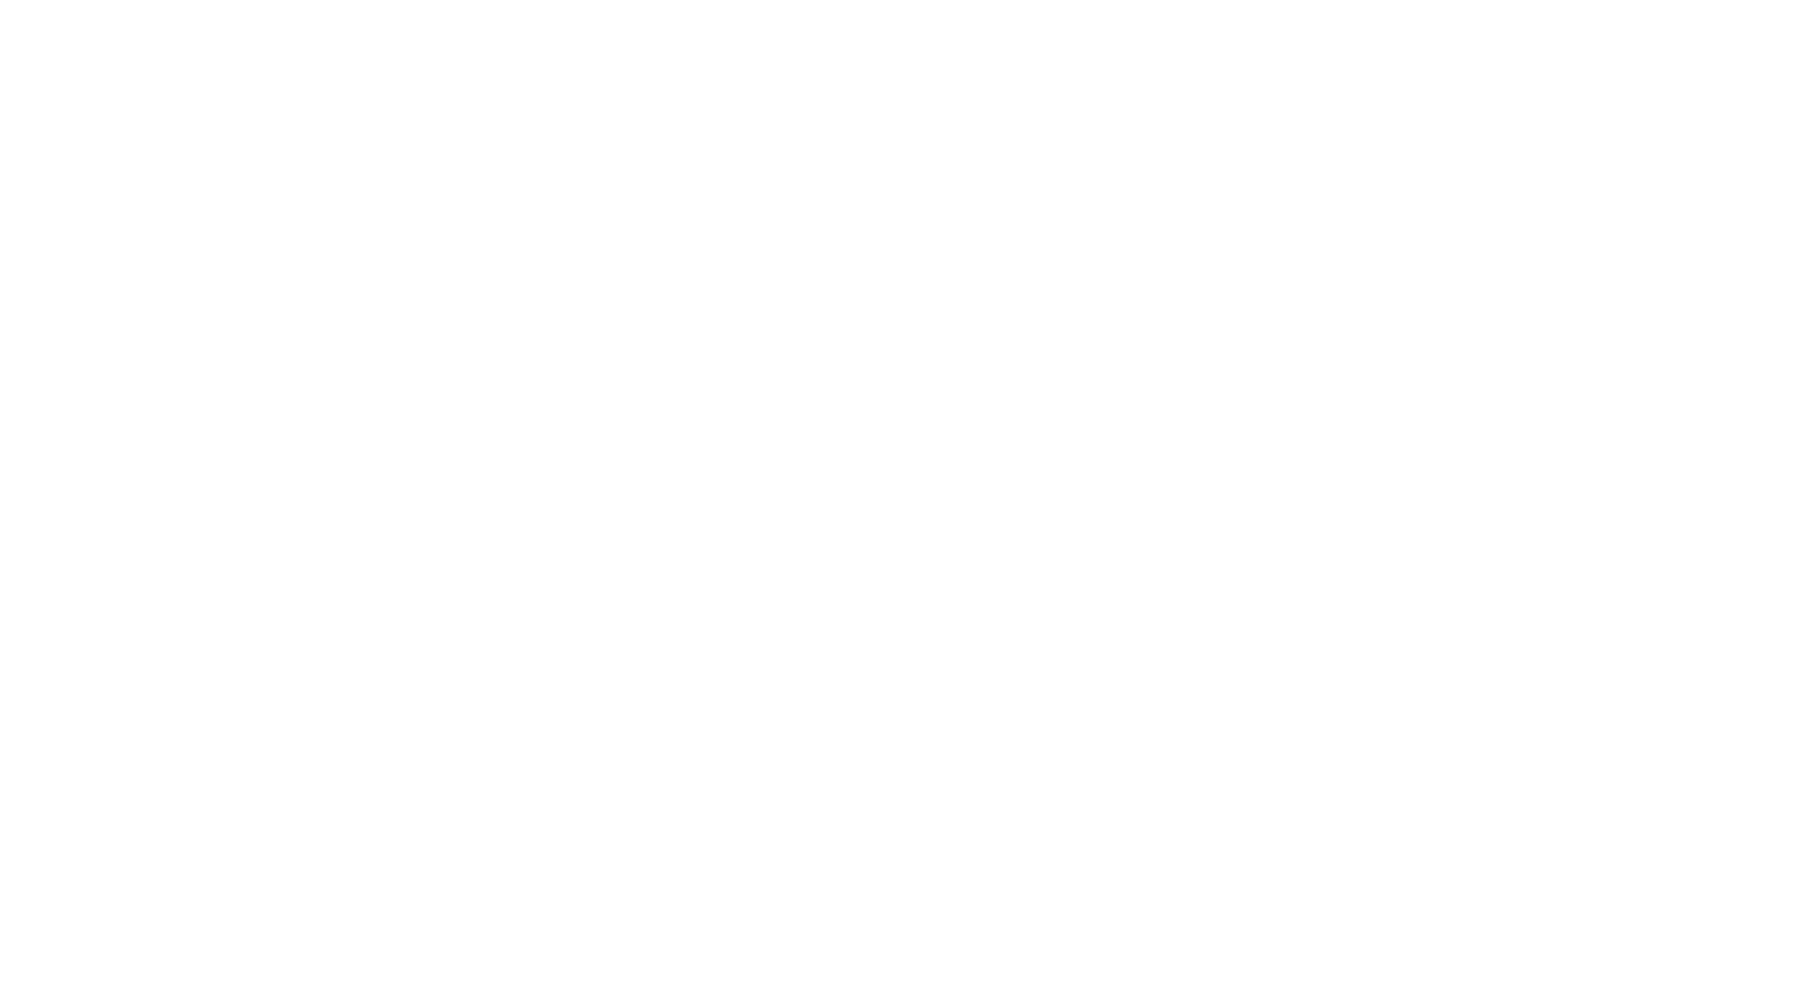 Web3 Labs – Full visibility of your blockchain